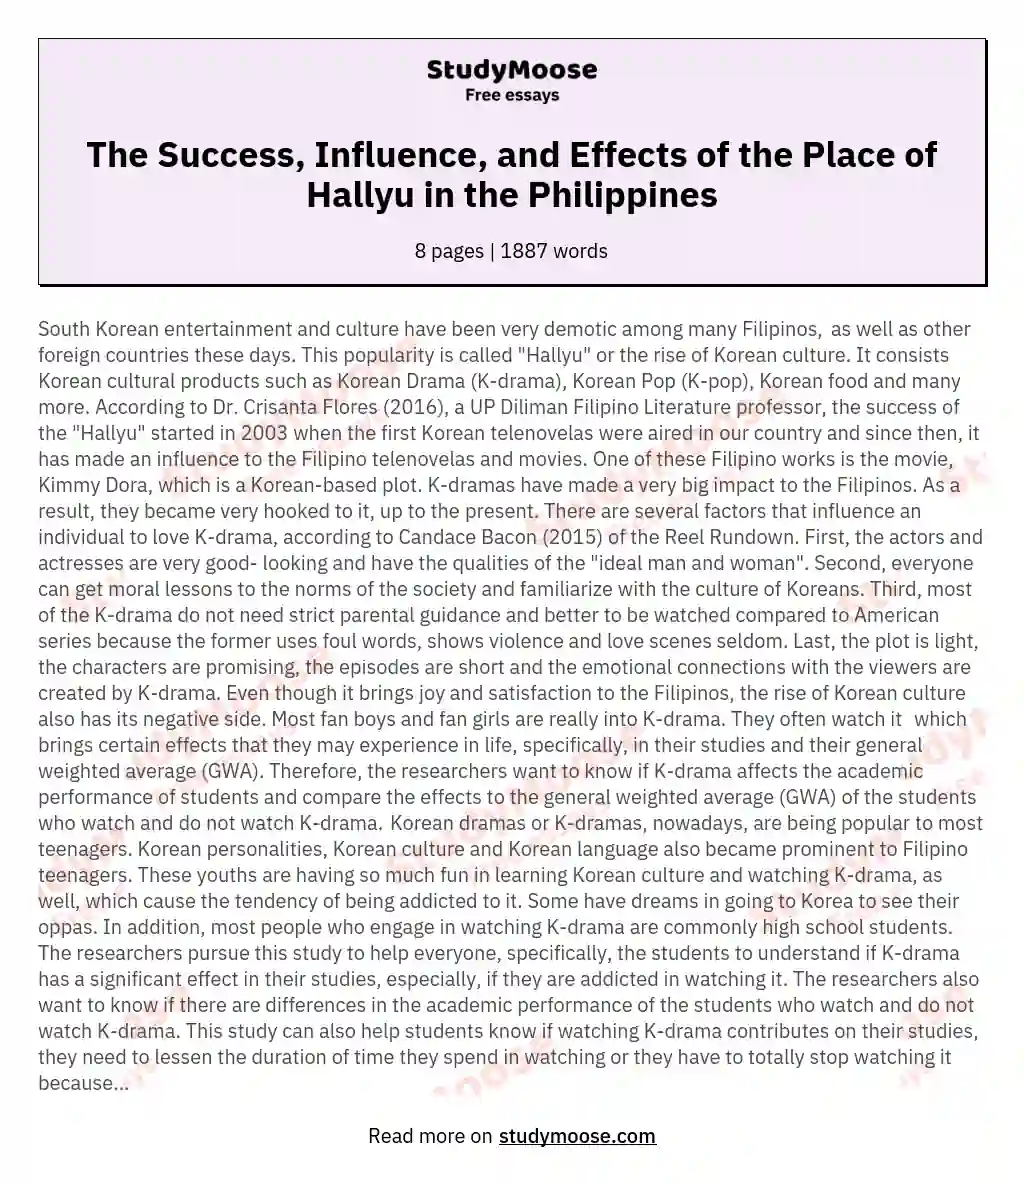 The Success, Influence, and Effects of the Place of Hallyu in the Philippines essay